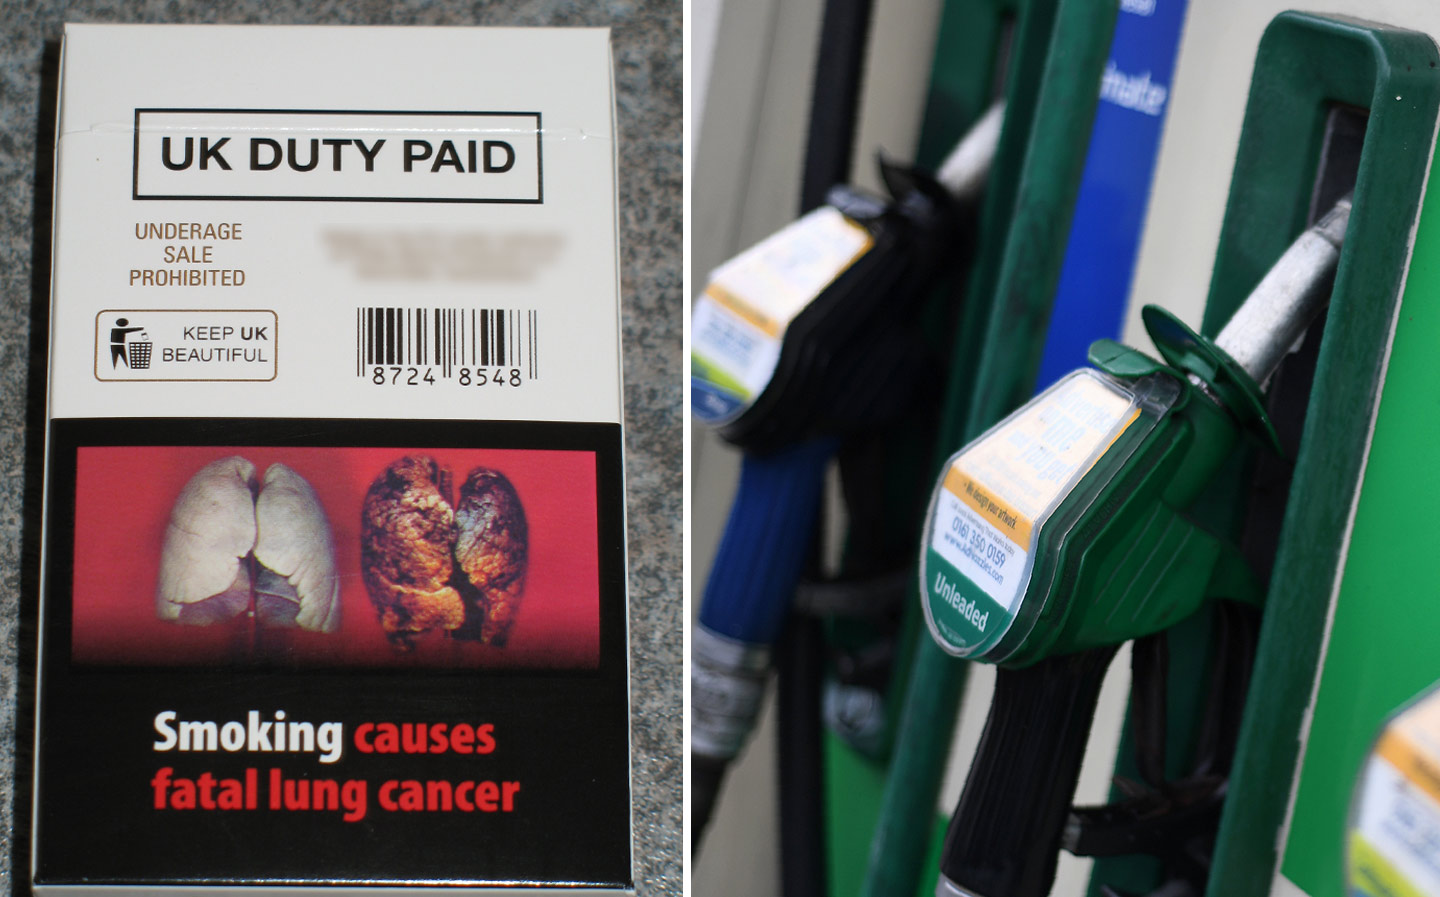 Petrol pumps should carry cigarette-style images of blackened lungs, says health experts